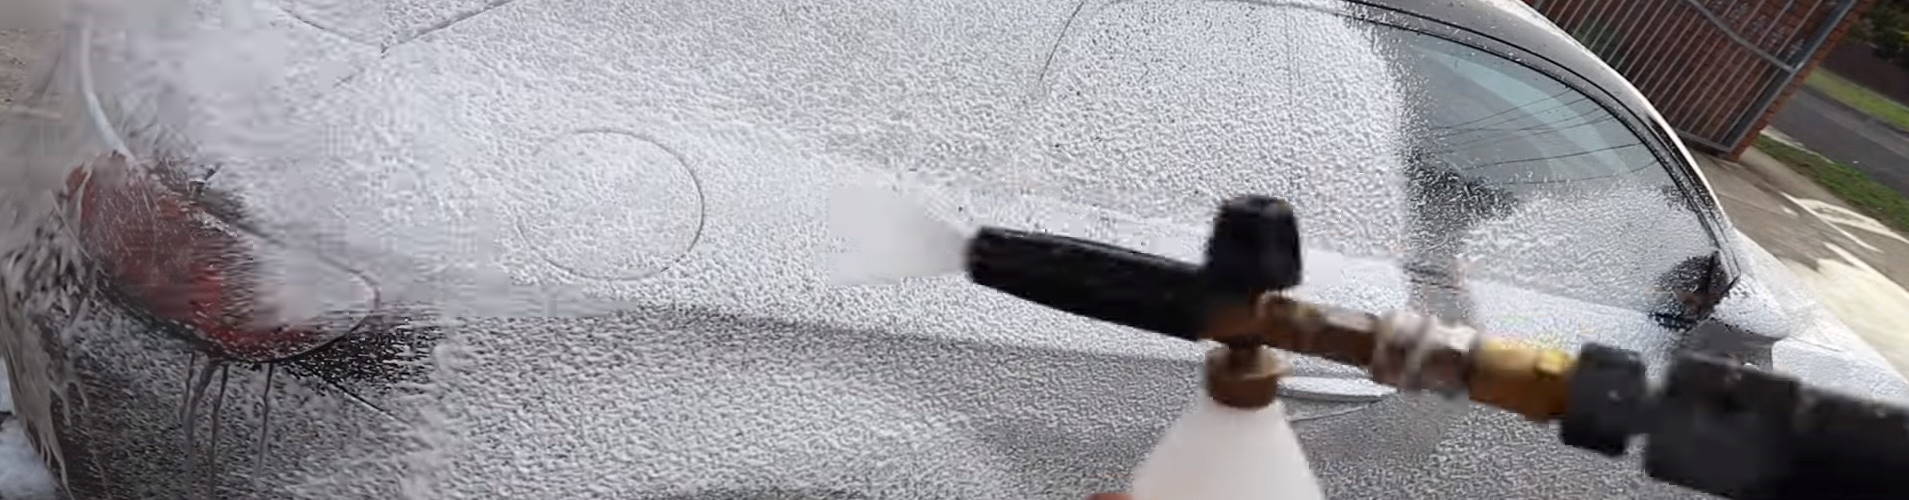 What Is The Best Snow Foam & Detergent & Why?